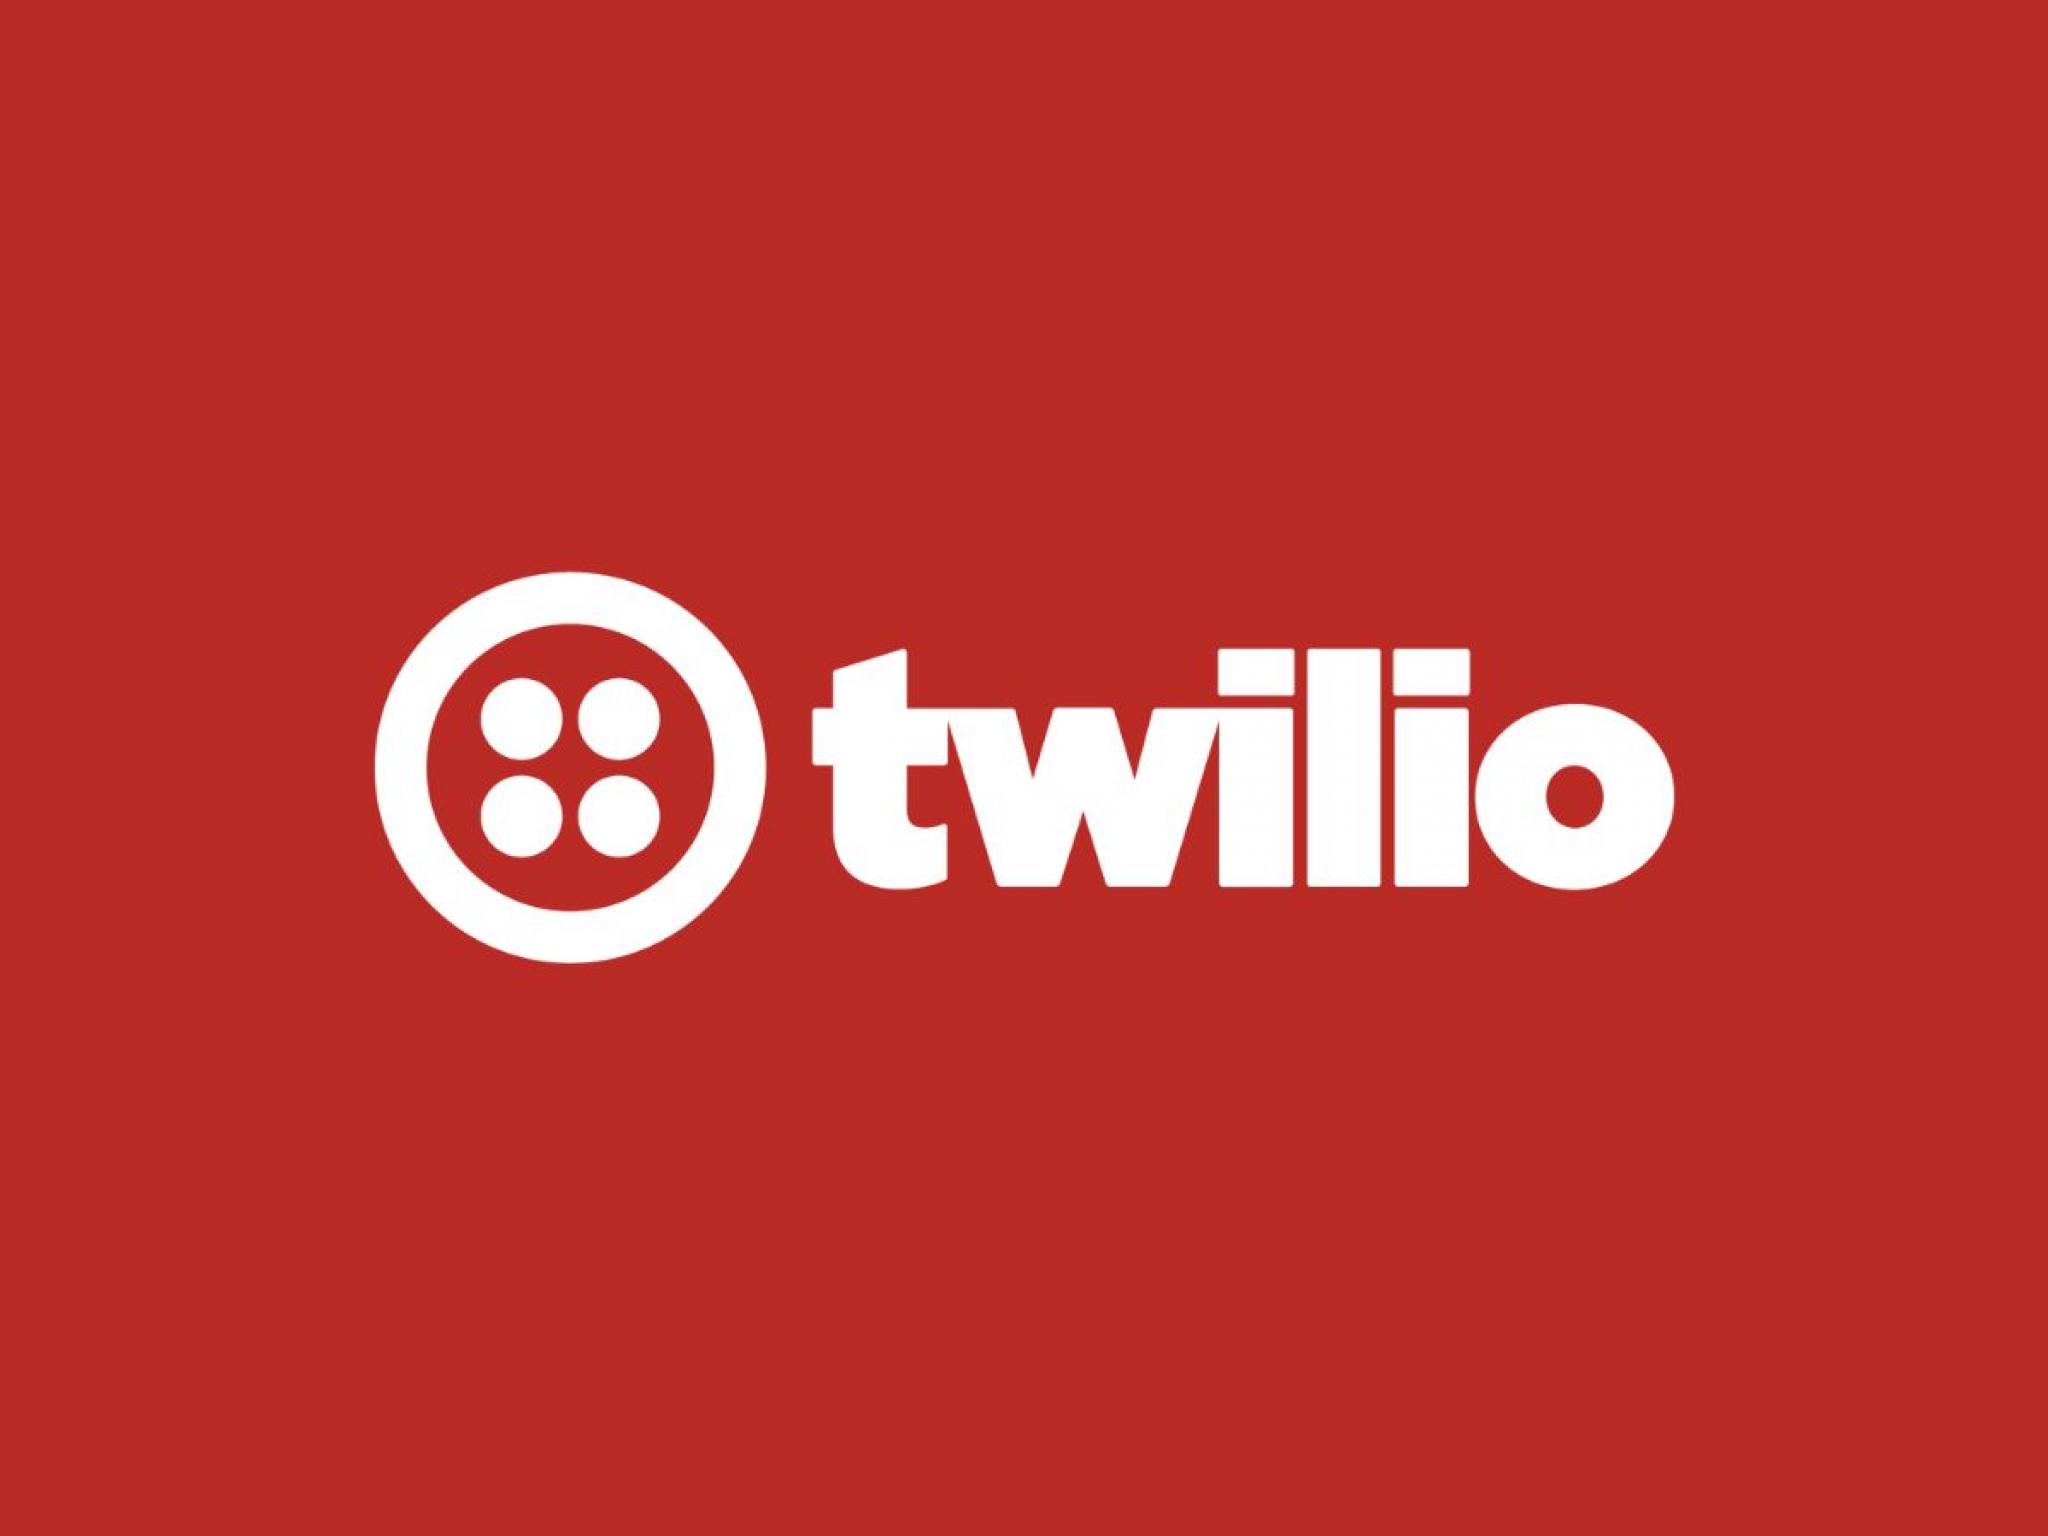  this-analyst-with-87-accuracy-rate-sees-around-20-upside-in-twilio---here-are-5-stock-picks-for-last-week-from-wall-streets-most-accurate-analysts 